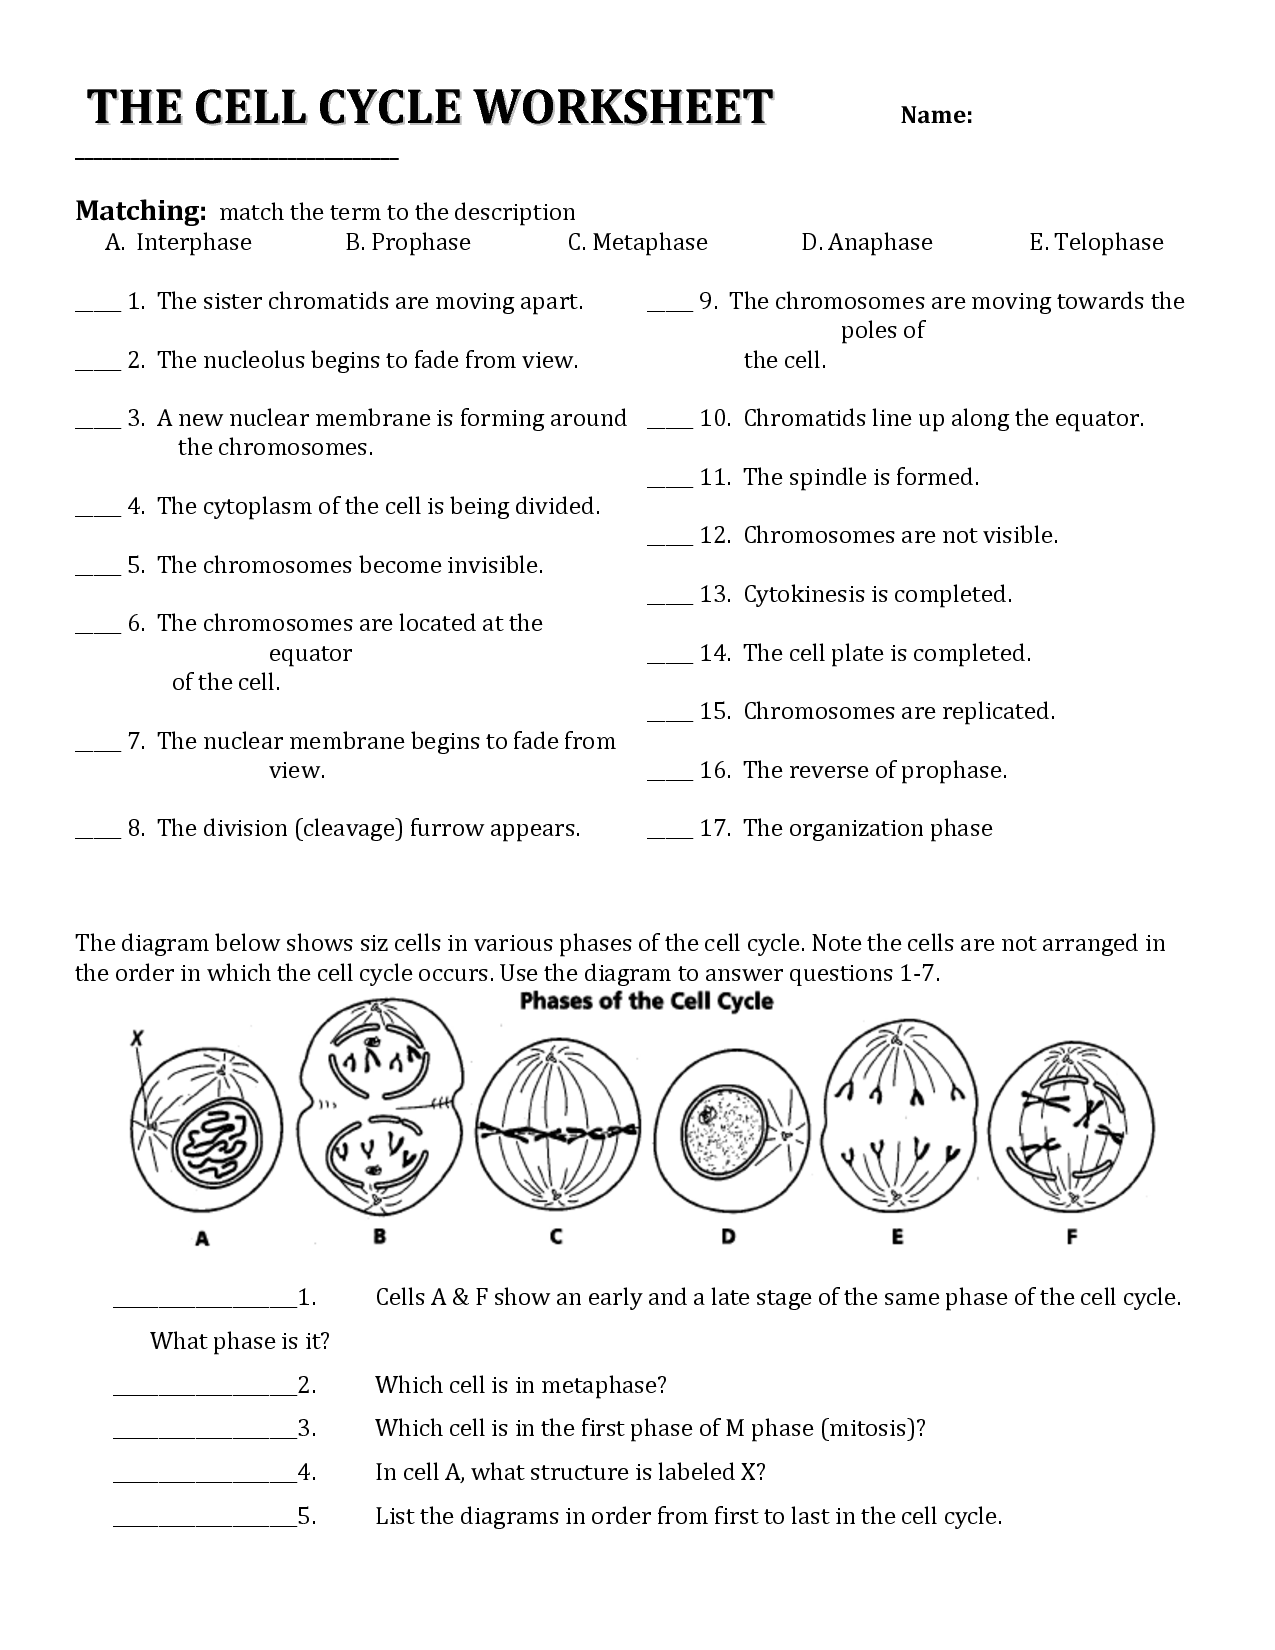 18 Best Images of Cell Cycle Review Worksheet Answers  Cell Cycle Worksheet Answers, Cell Cycle 